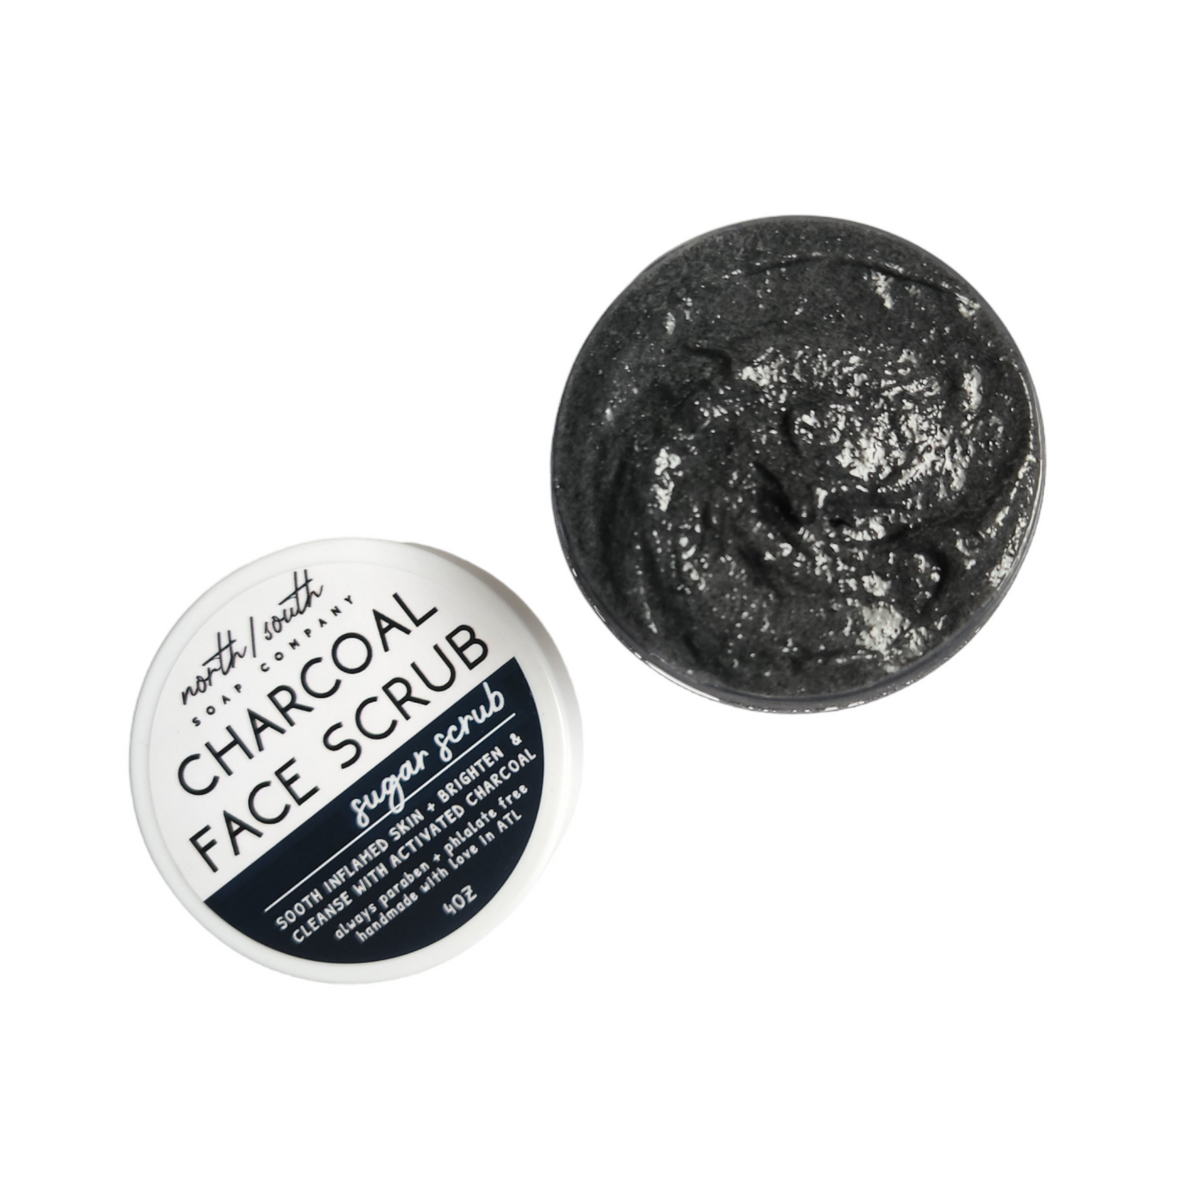 Activated Charcoal Face Sugar Scrub